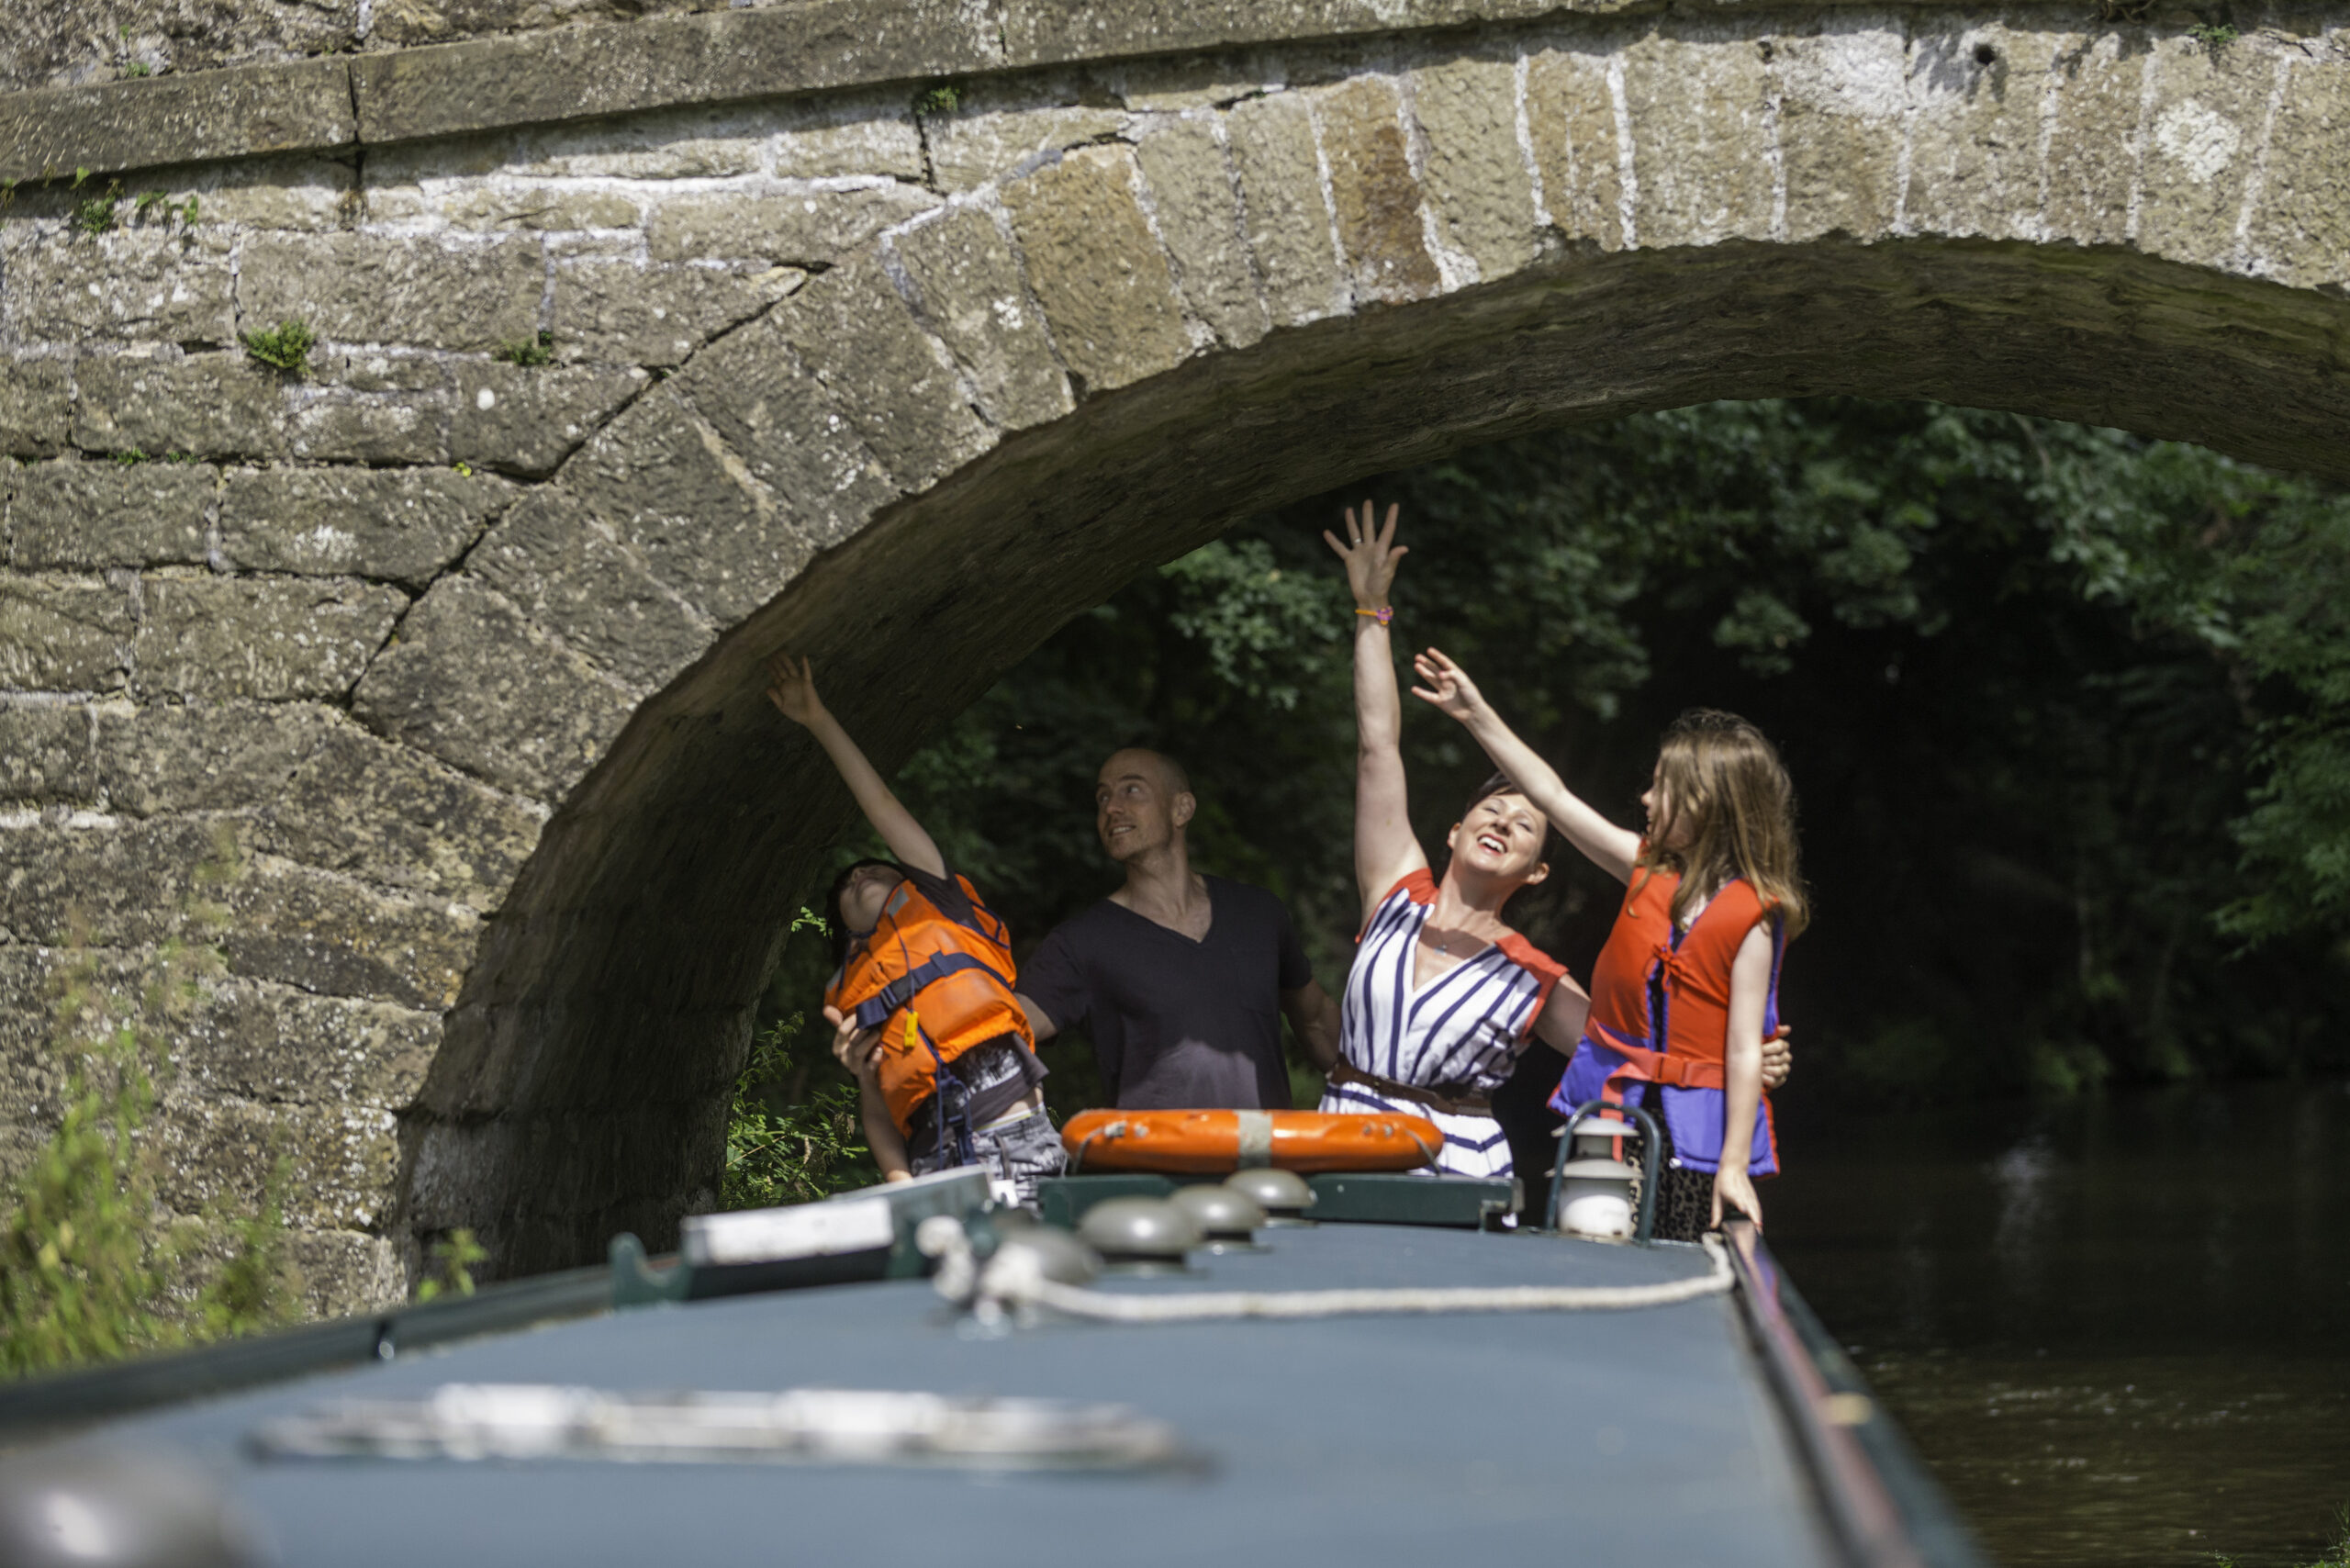 The narrowboat holiday kit list: what to pack for your staycation